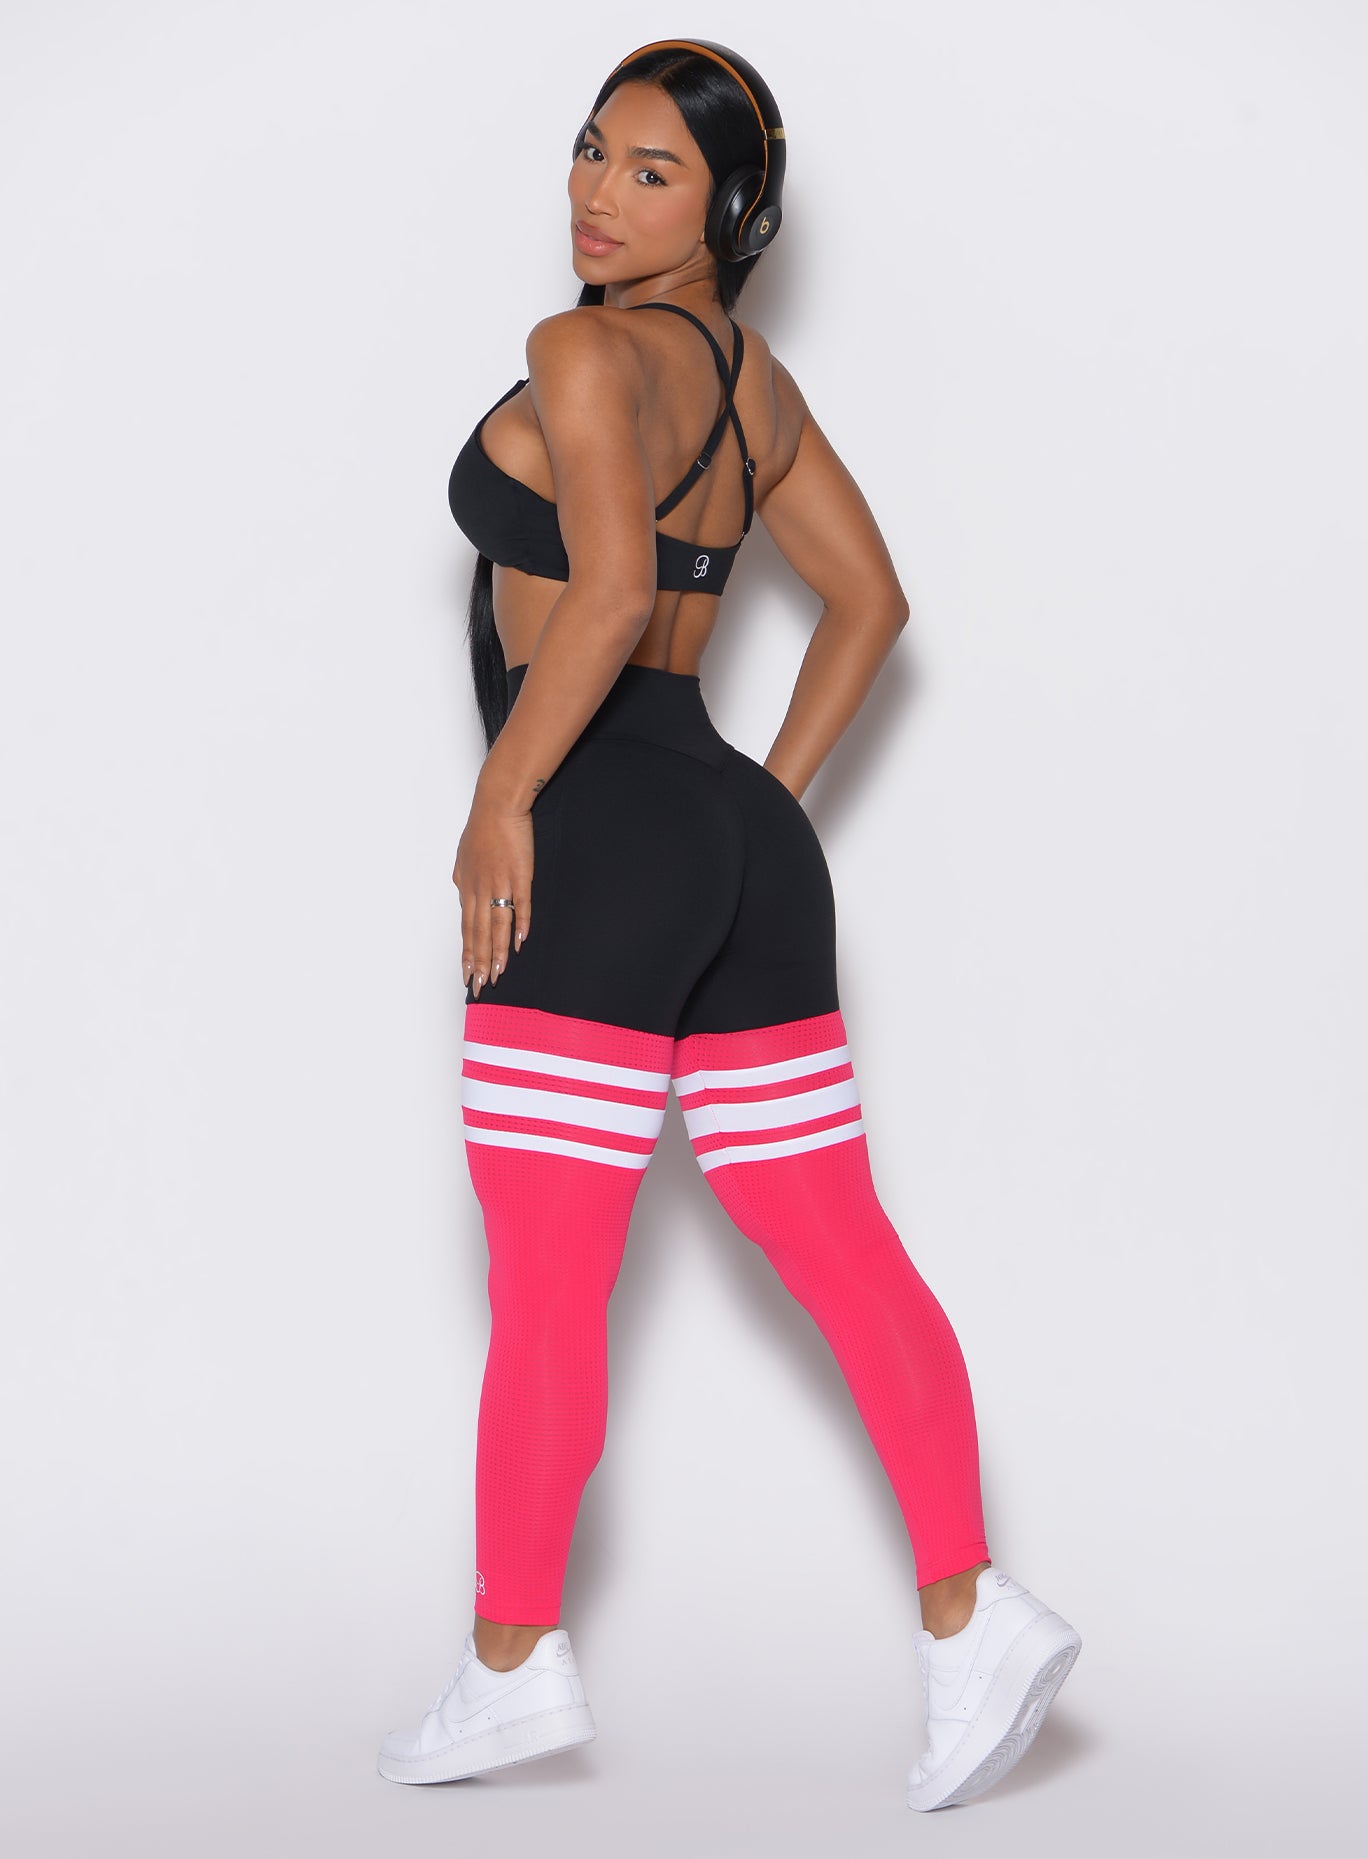 Back left side profile view of a model wearing the Perform Thigh Highs in Black Sky color along with a black sports bra